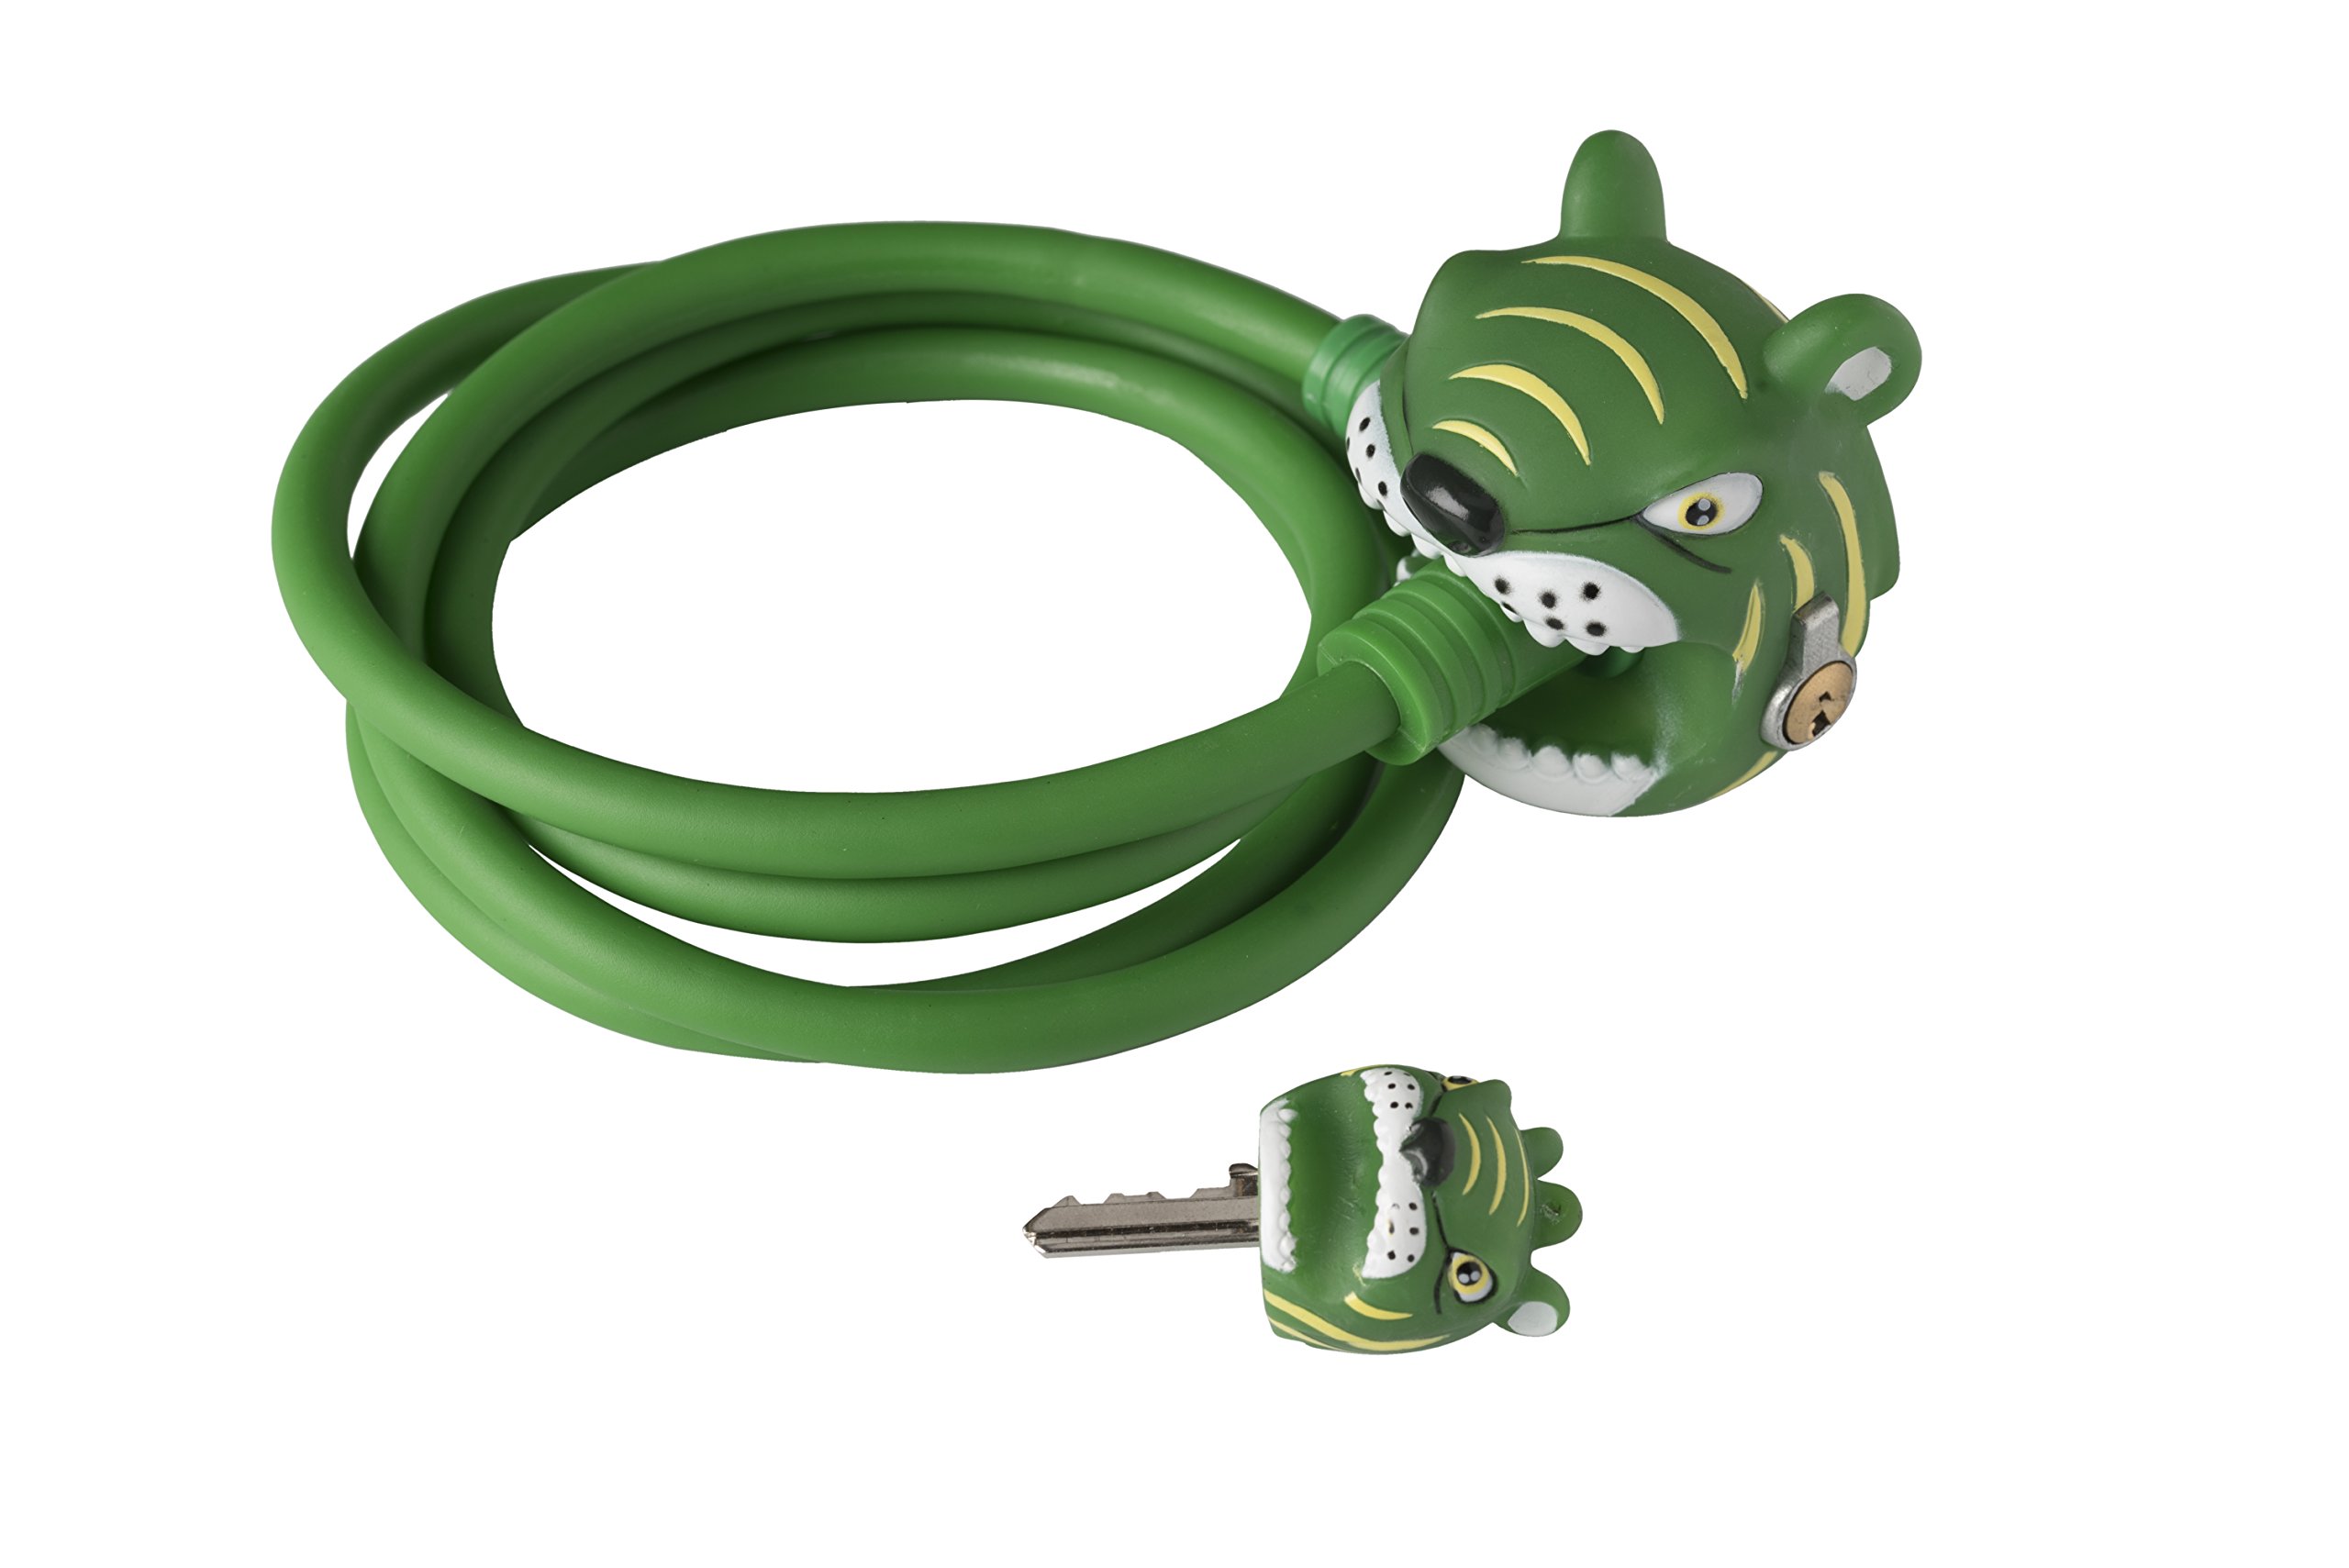 CZK24 Crazy Safety Green Tiger Cable Lock